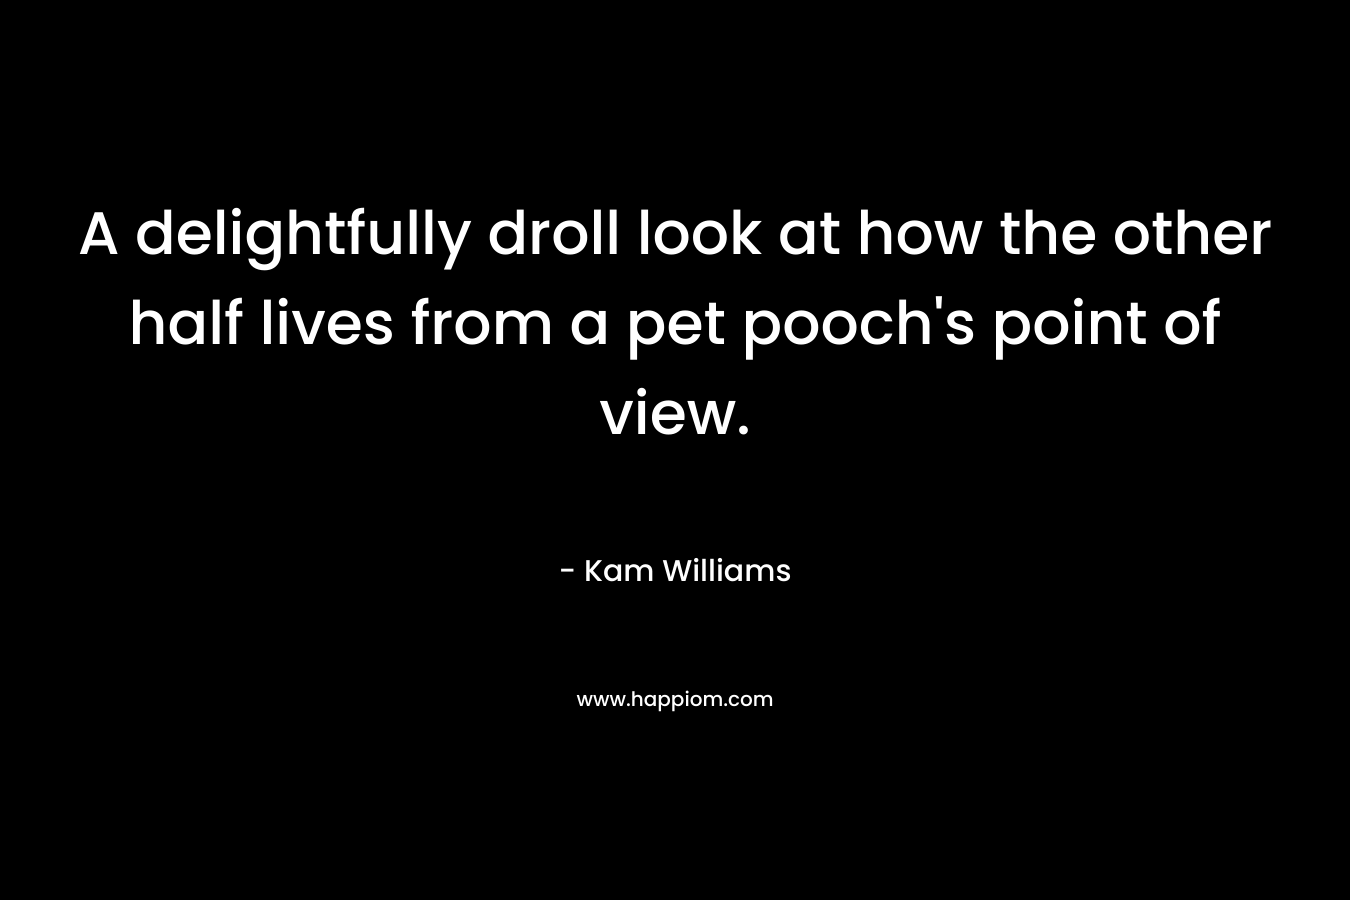 A delightfully droll look at how the other half lives from a pet pooch's point of view.